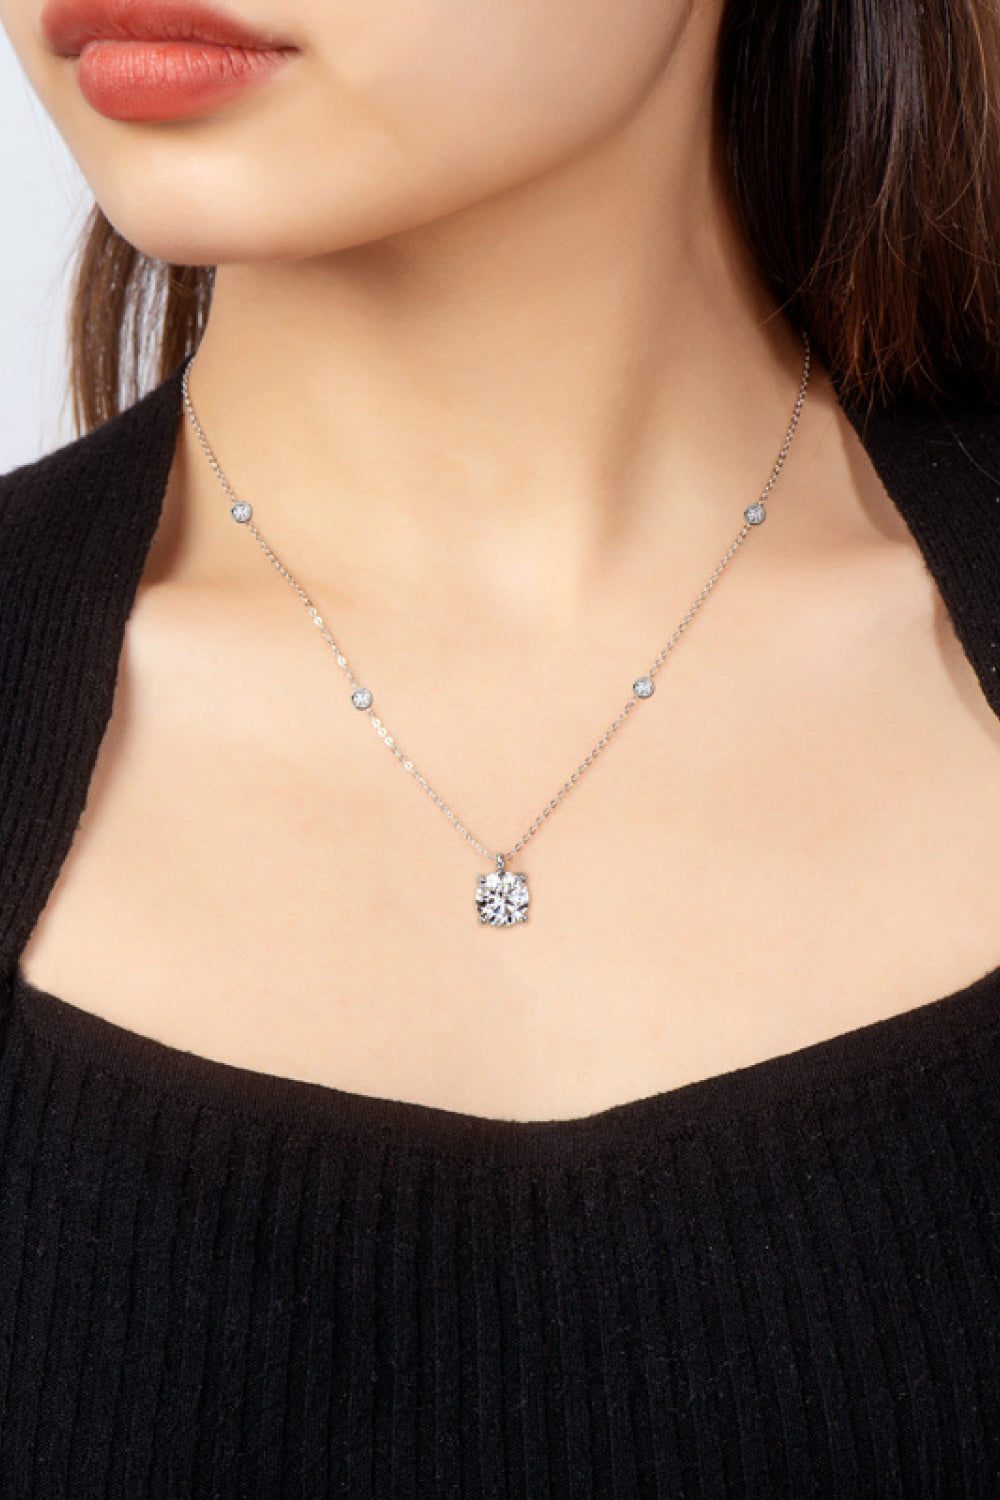 2 Carat Moissanite 4-Prong 925 Sterling Silver Necklace - Necklaces - FITGGINS